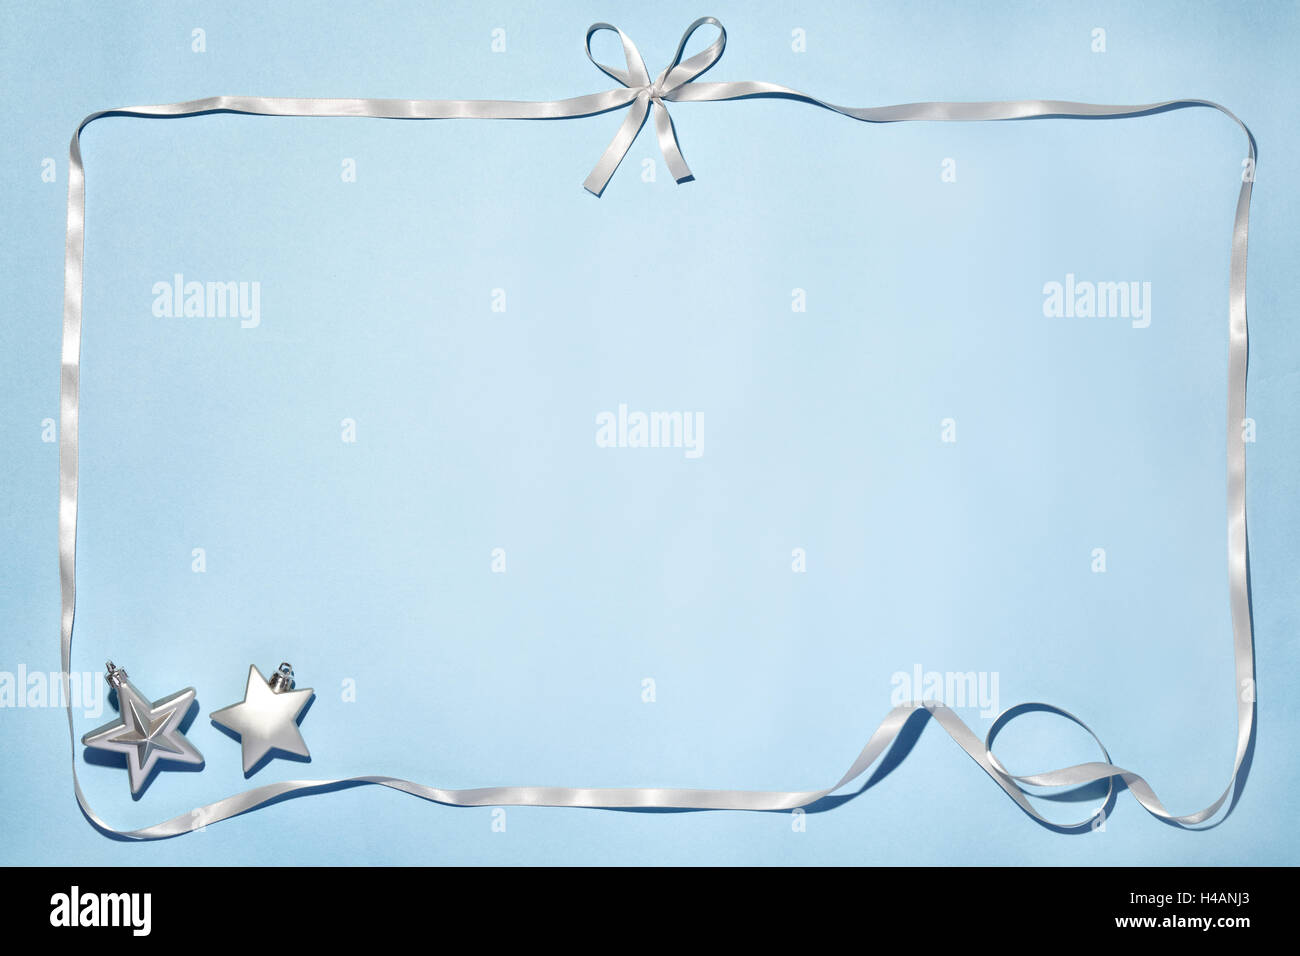 Silver ribbon and stars on blue background Stock Photo